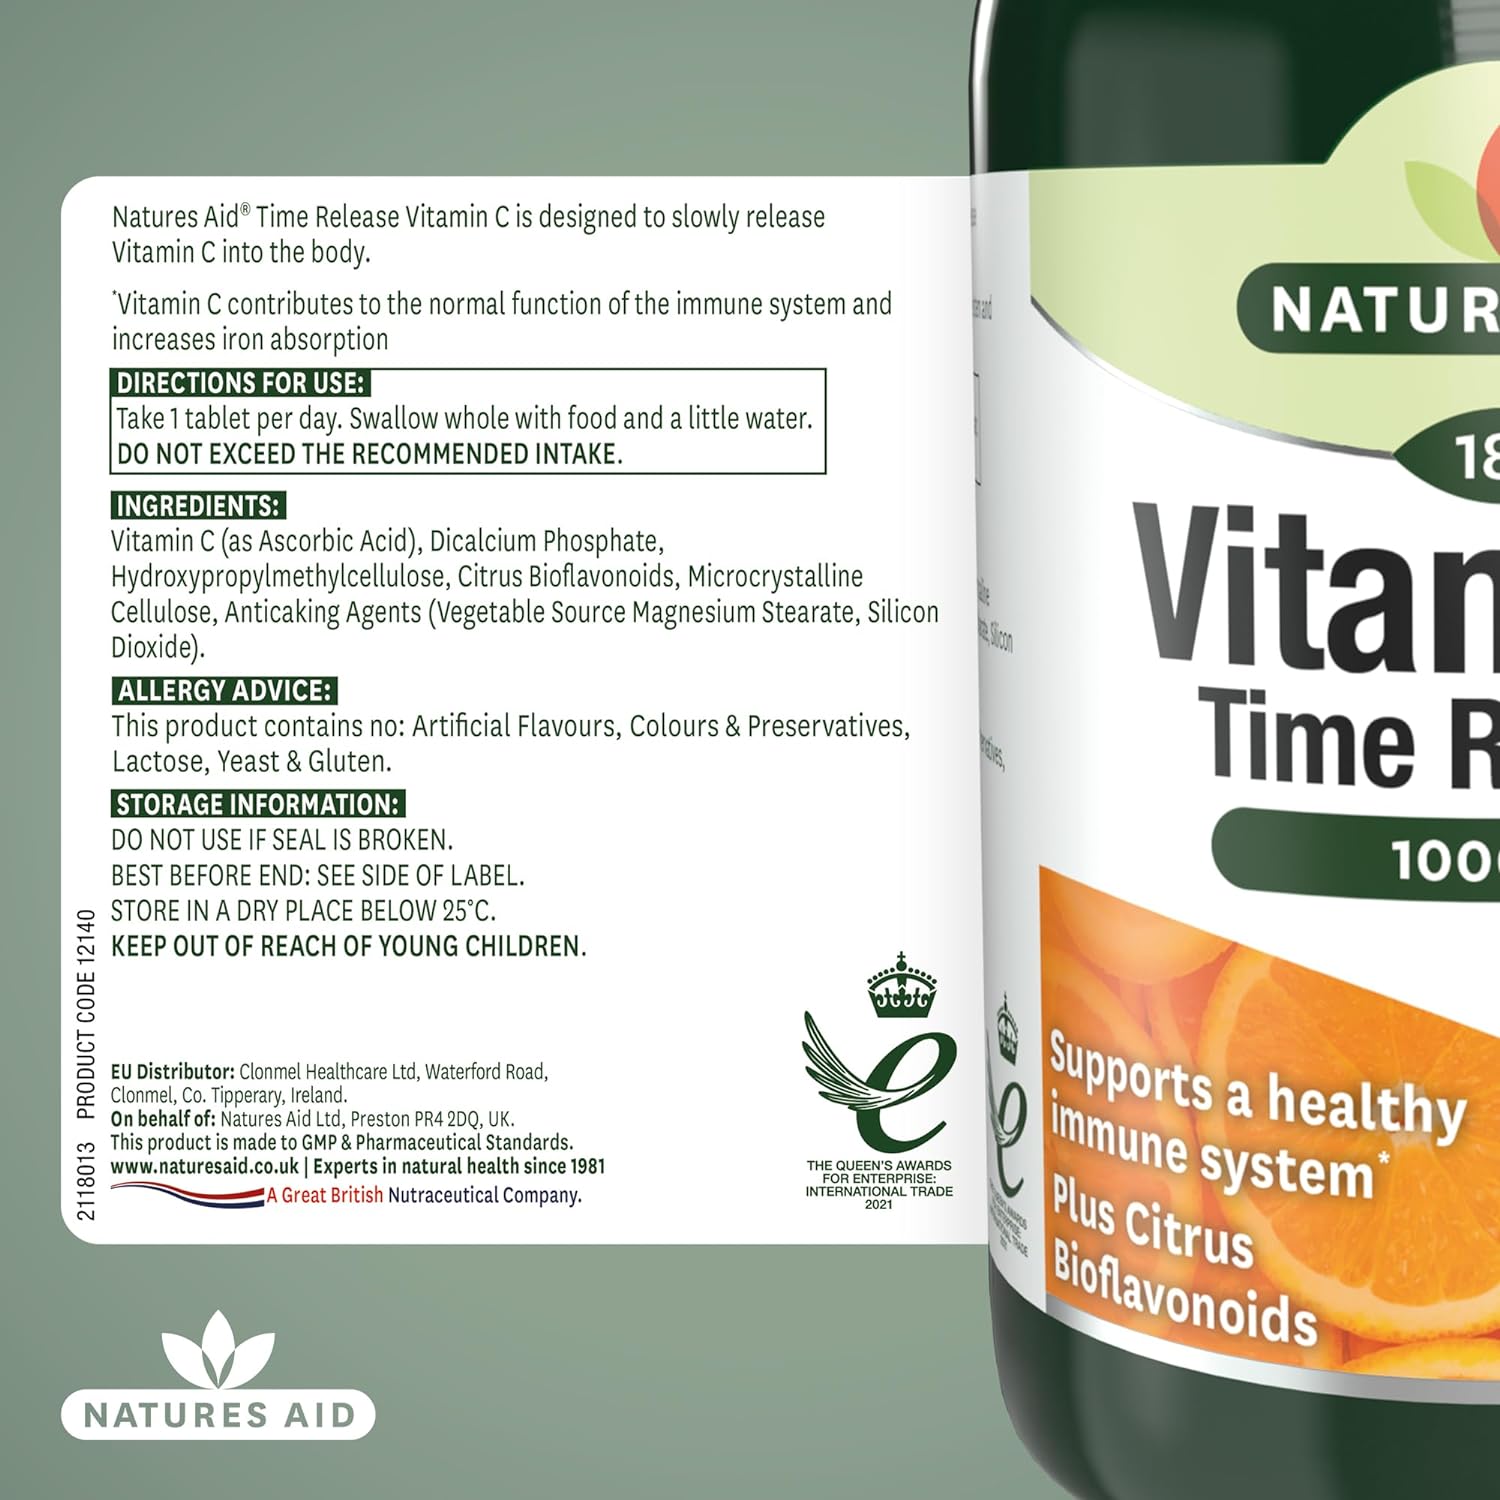 Vitamin C Time Release 1000mg 180 Tablets